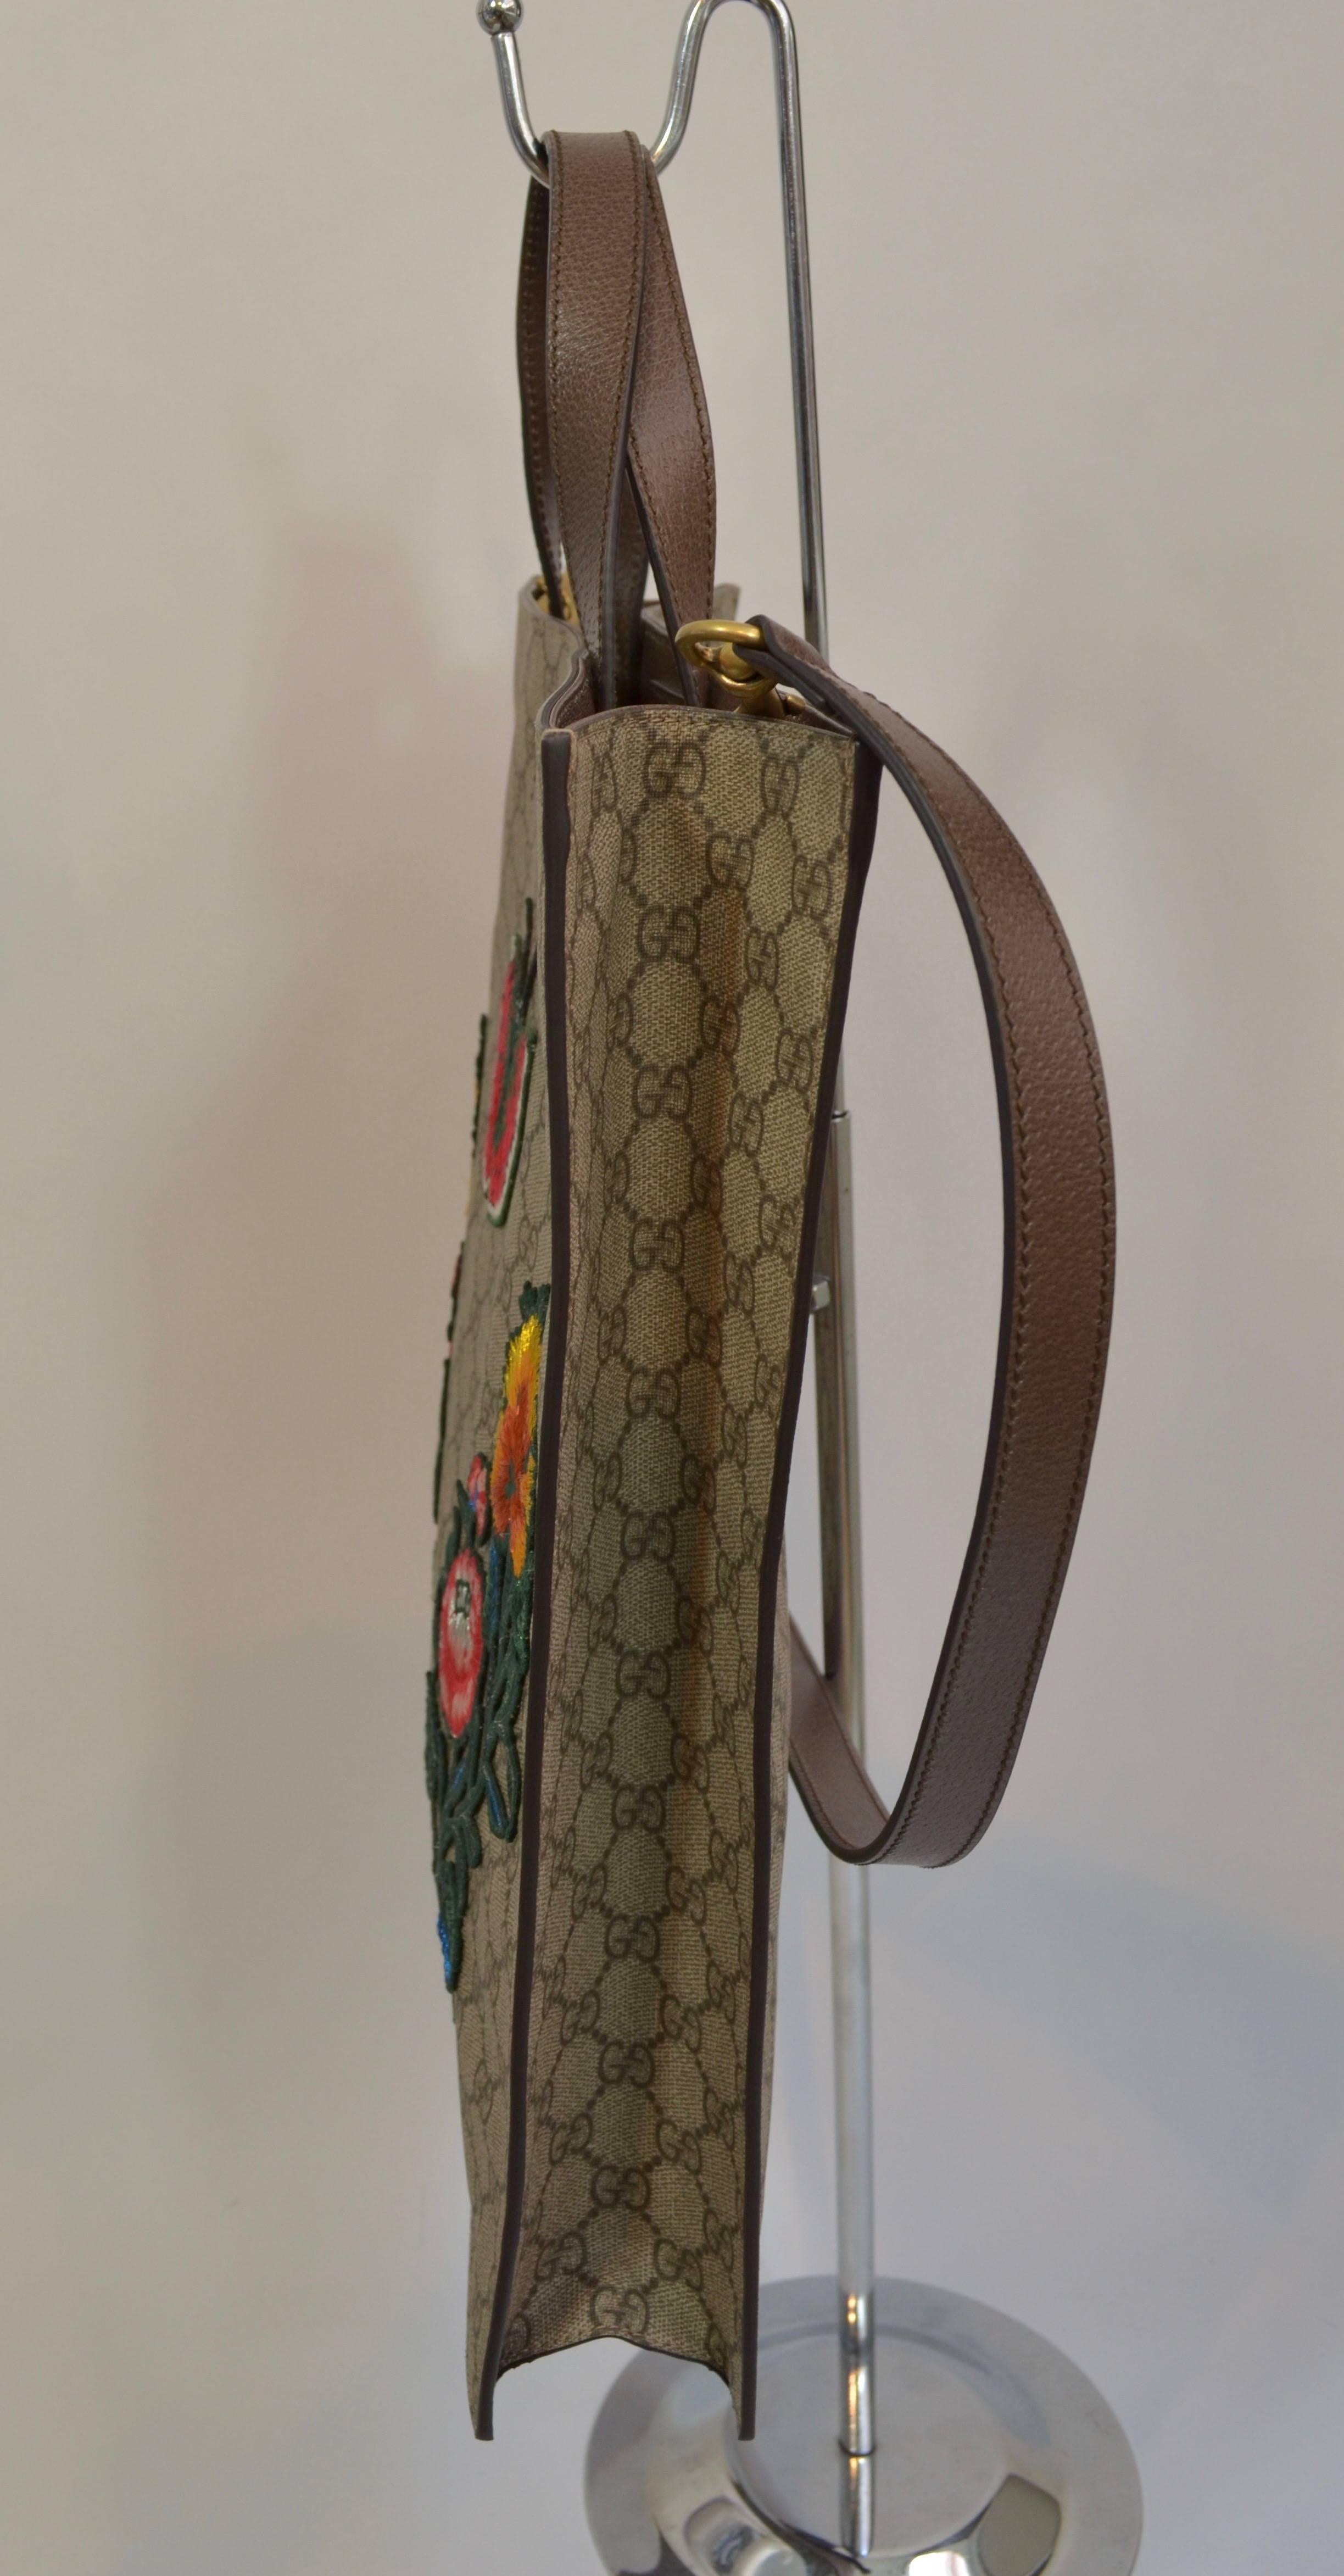 New with Tags still attached and unused Gucci Supreme Embroidered Butterfly 
Coated brown GG logo monogram canvas detailed with colorful embroidered flowers and a butterfly. Carry it by the two top handles or the adjustable crossbody strap. The